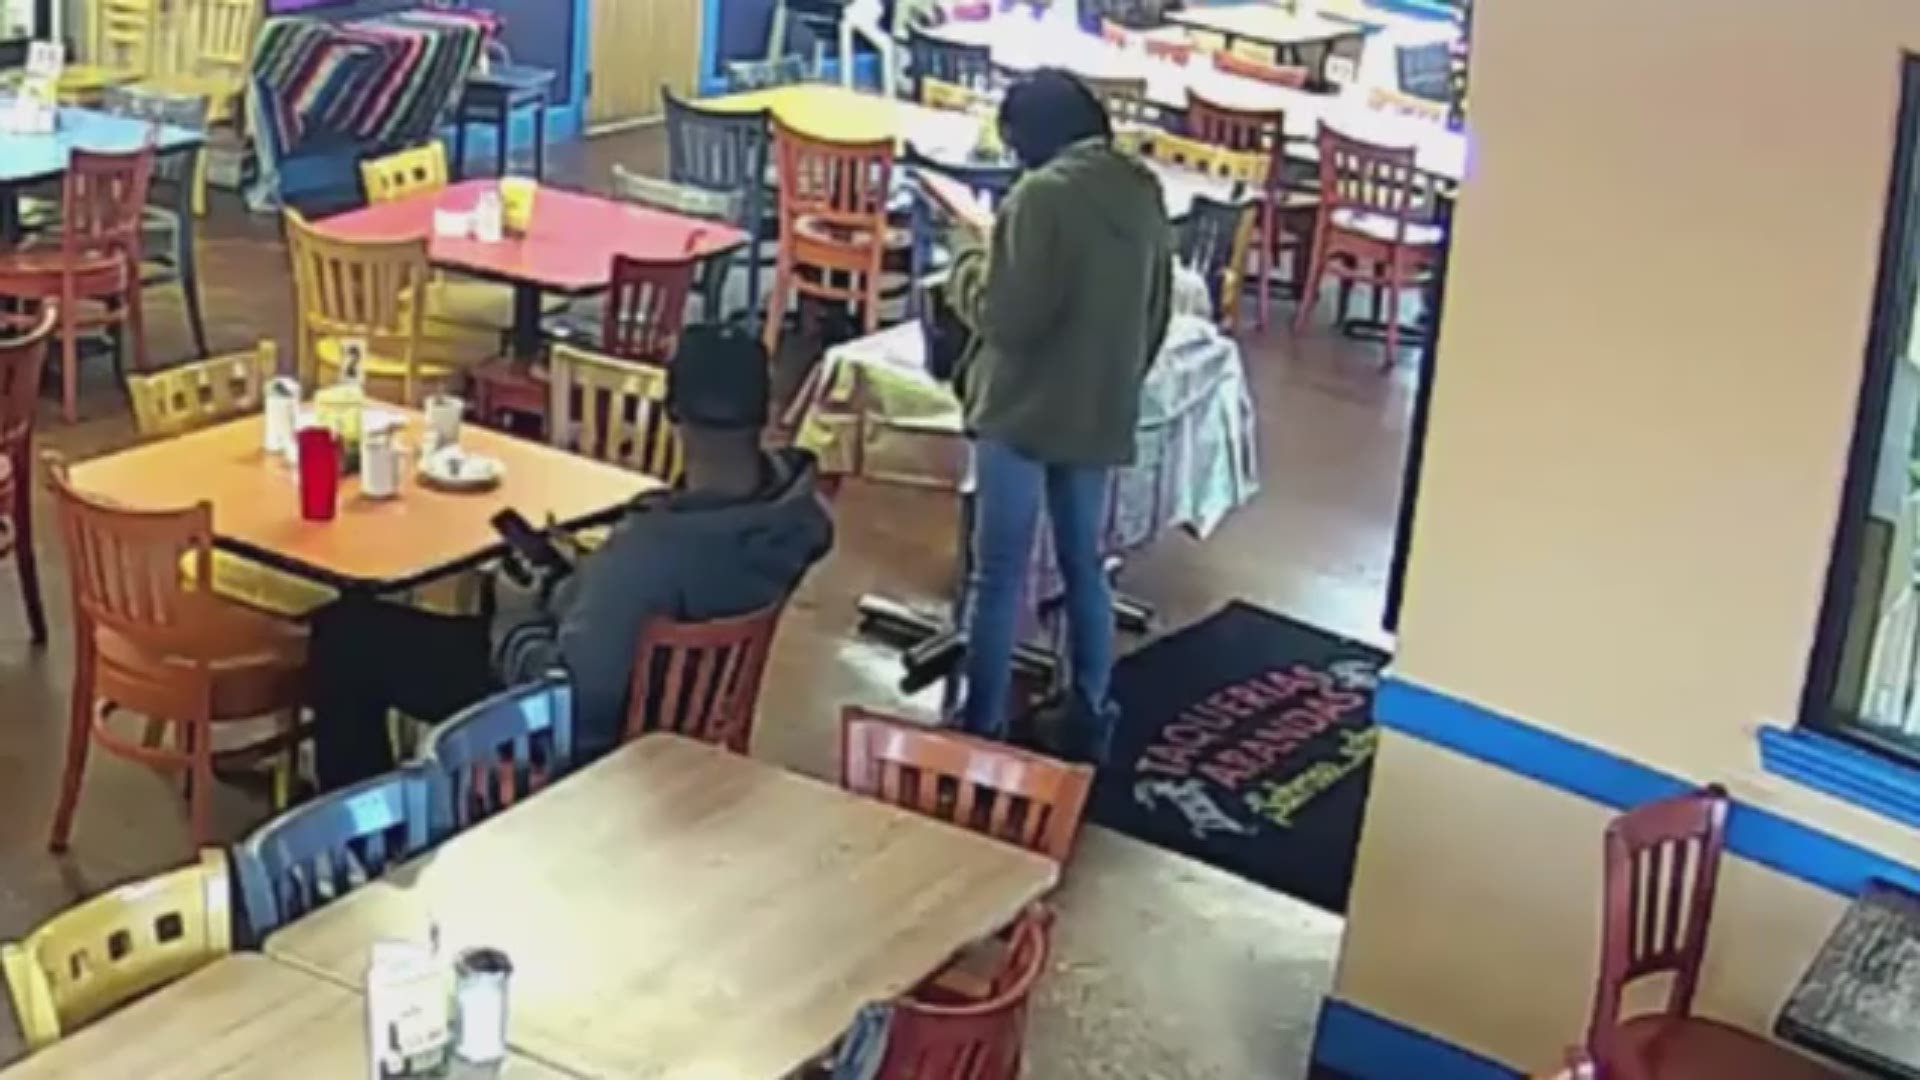 Houston police are looking for two suspects who left a Taqueria Arandas in southwest Houston without paying for their meal.